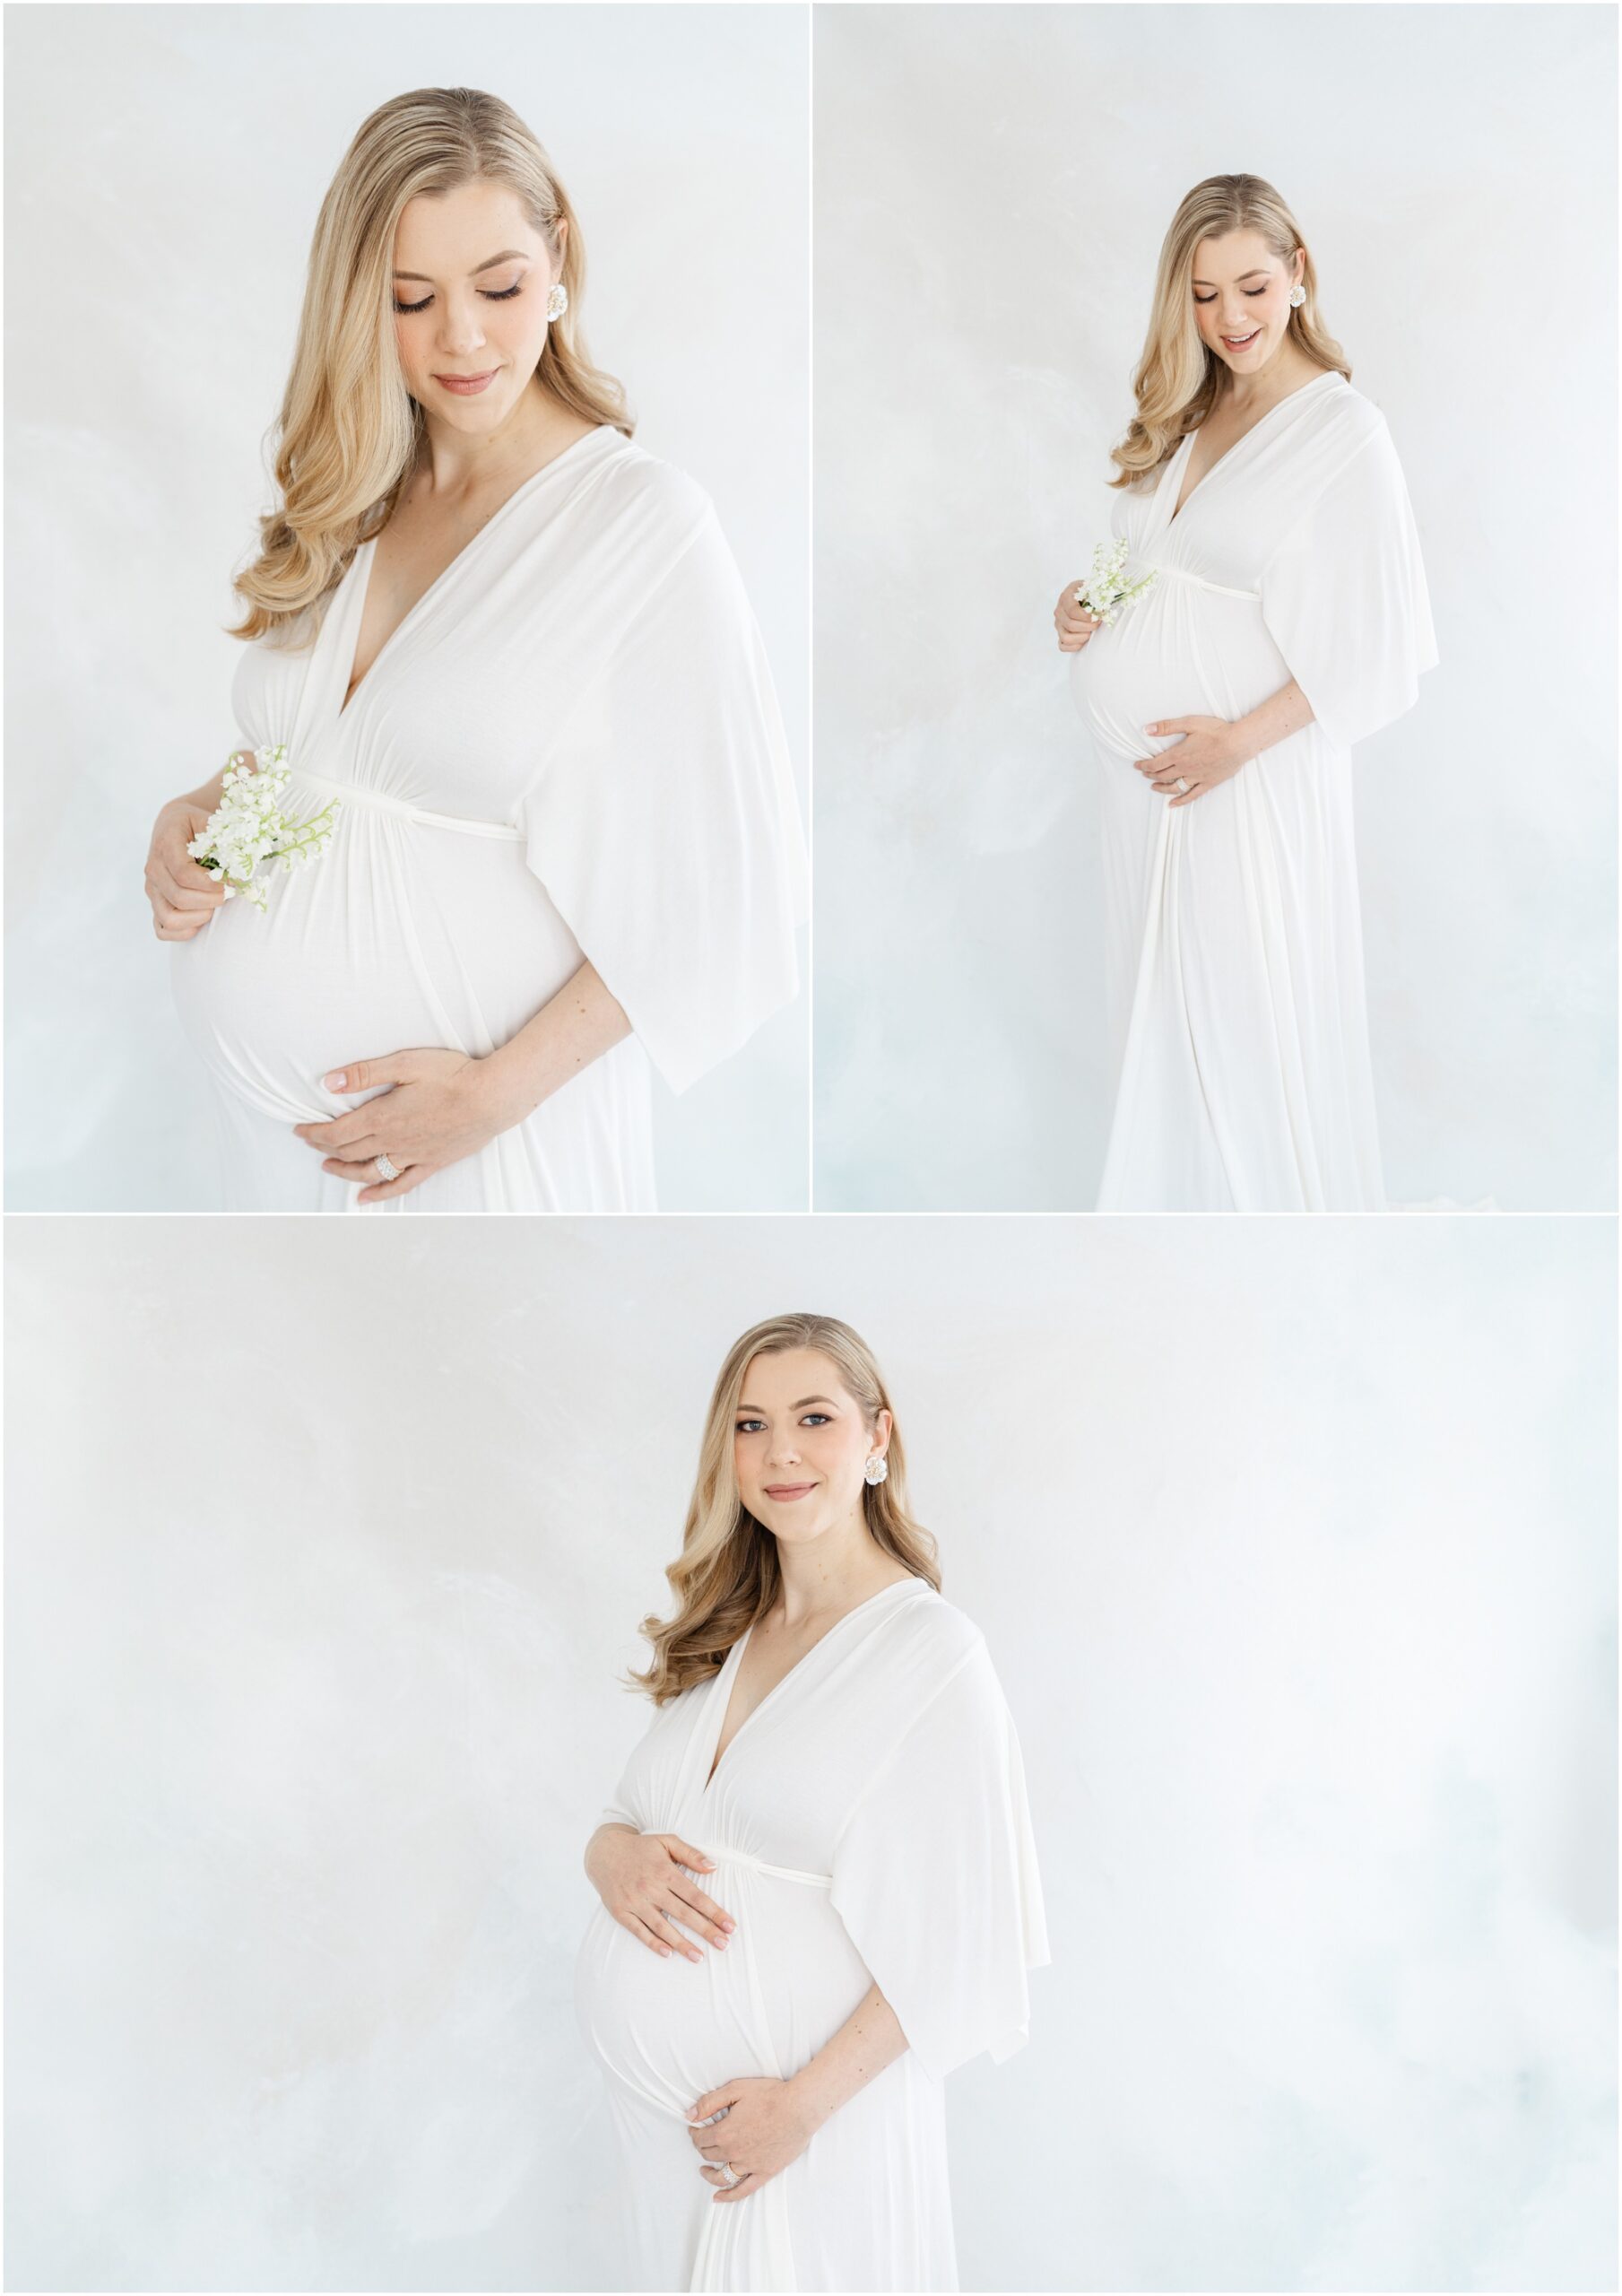 Fine art Atlanta maternity photos of a young expecting mother in a white dress in front of a handpainted soft blue backdrop.